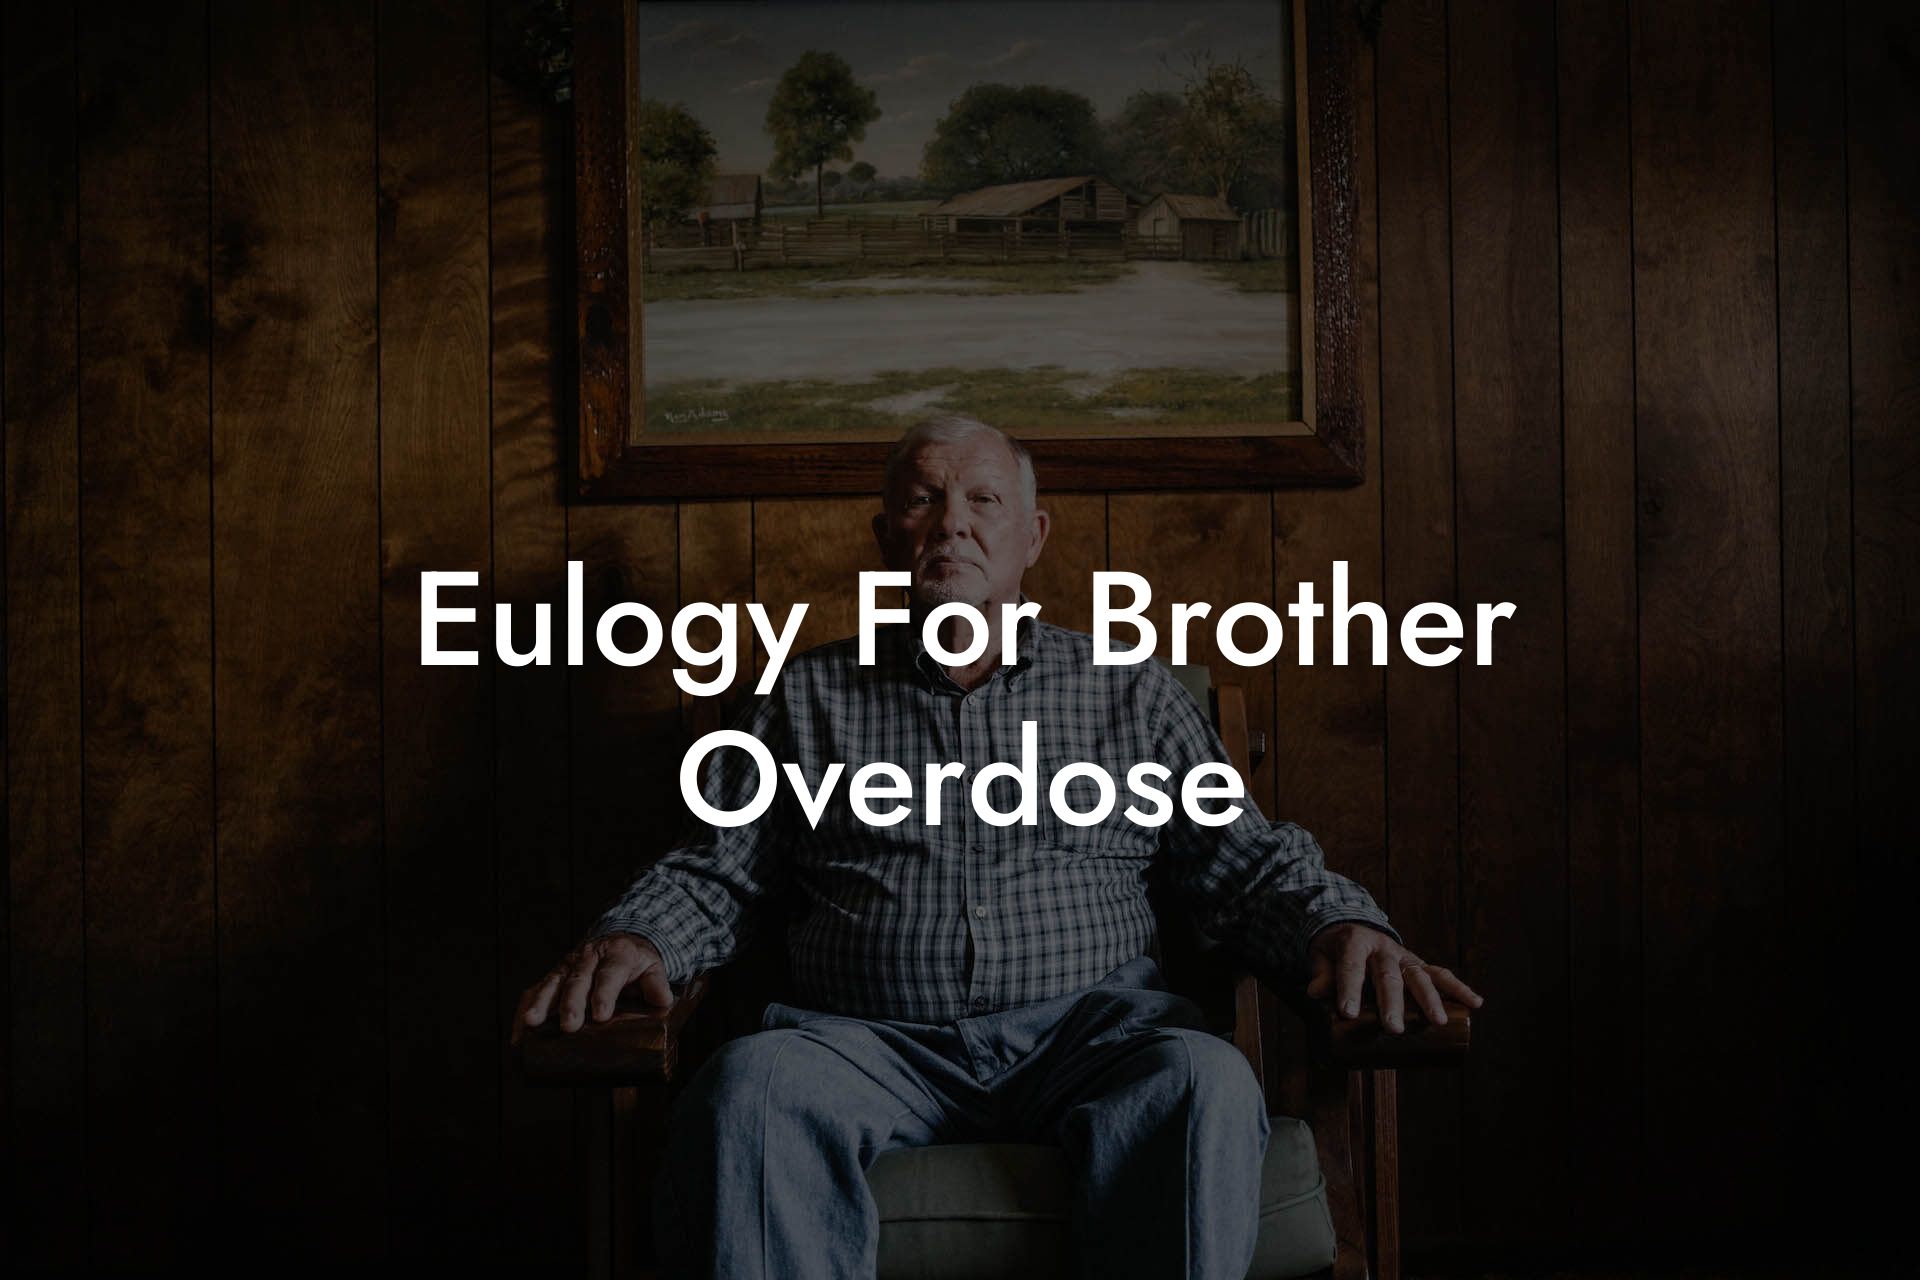 Eulogy For Brother Overdose